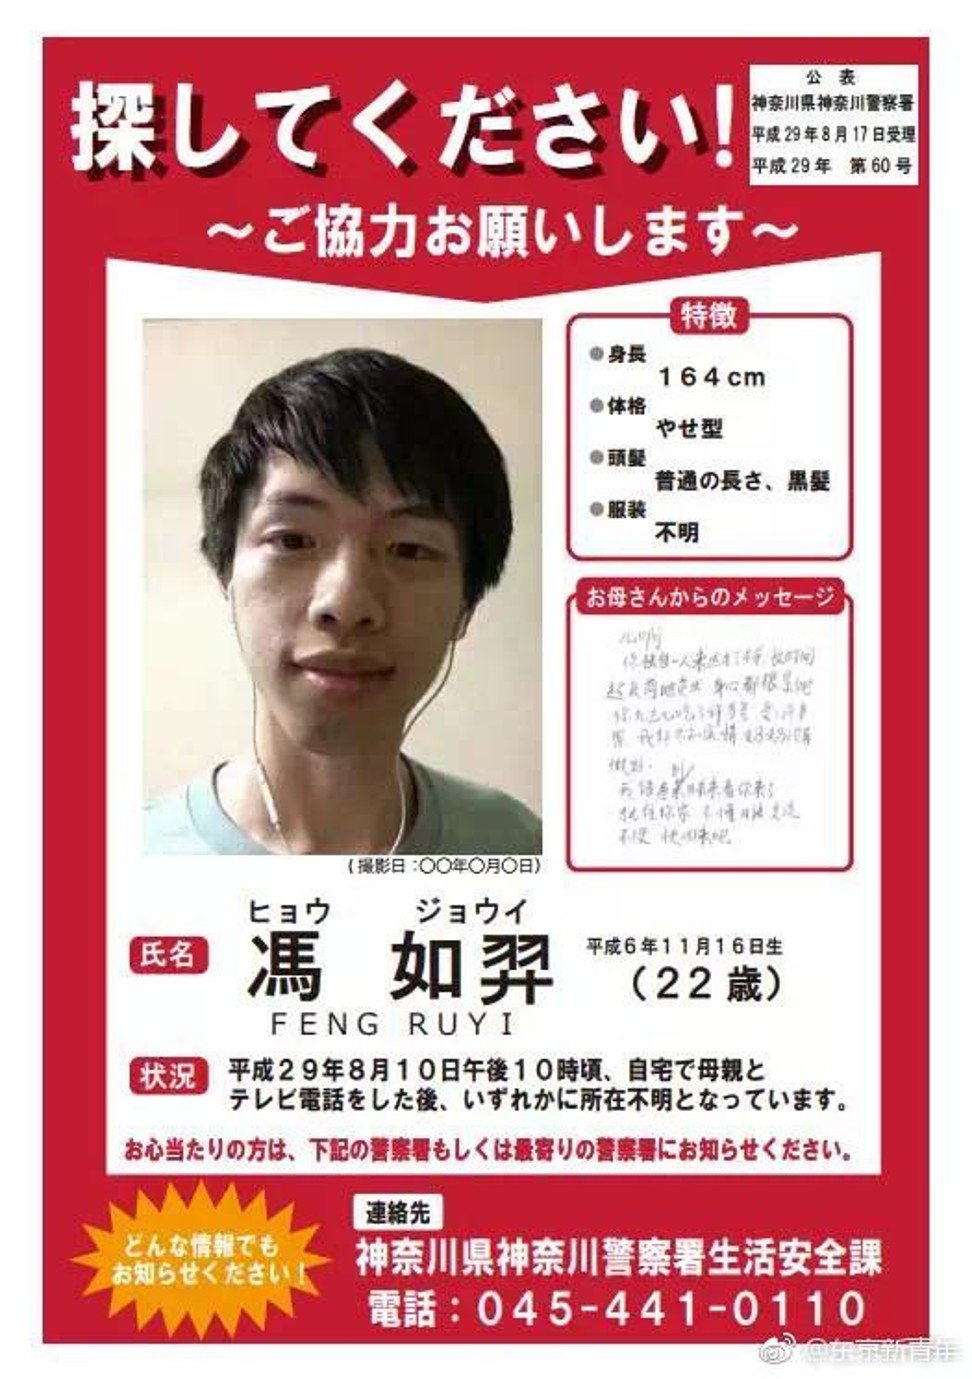 A poster appeals for information about the missing student. Photo: Handout